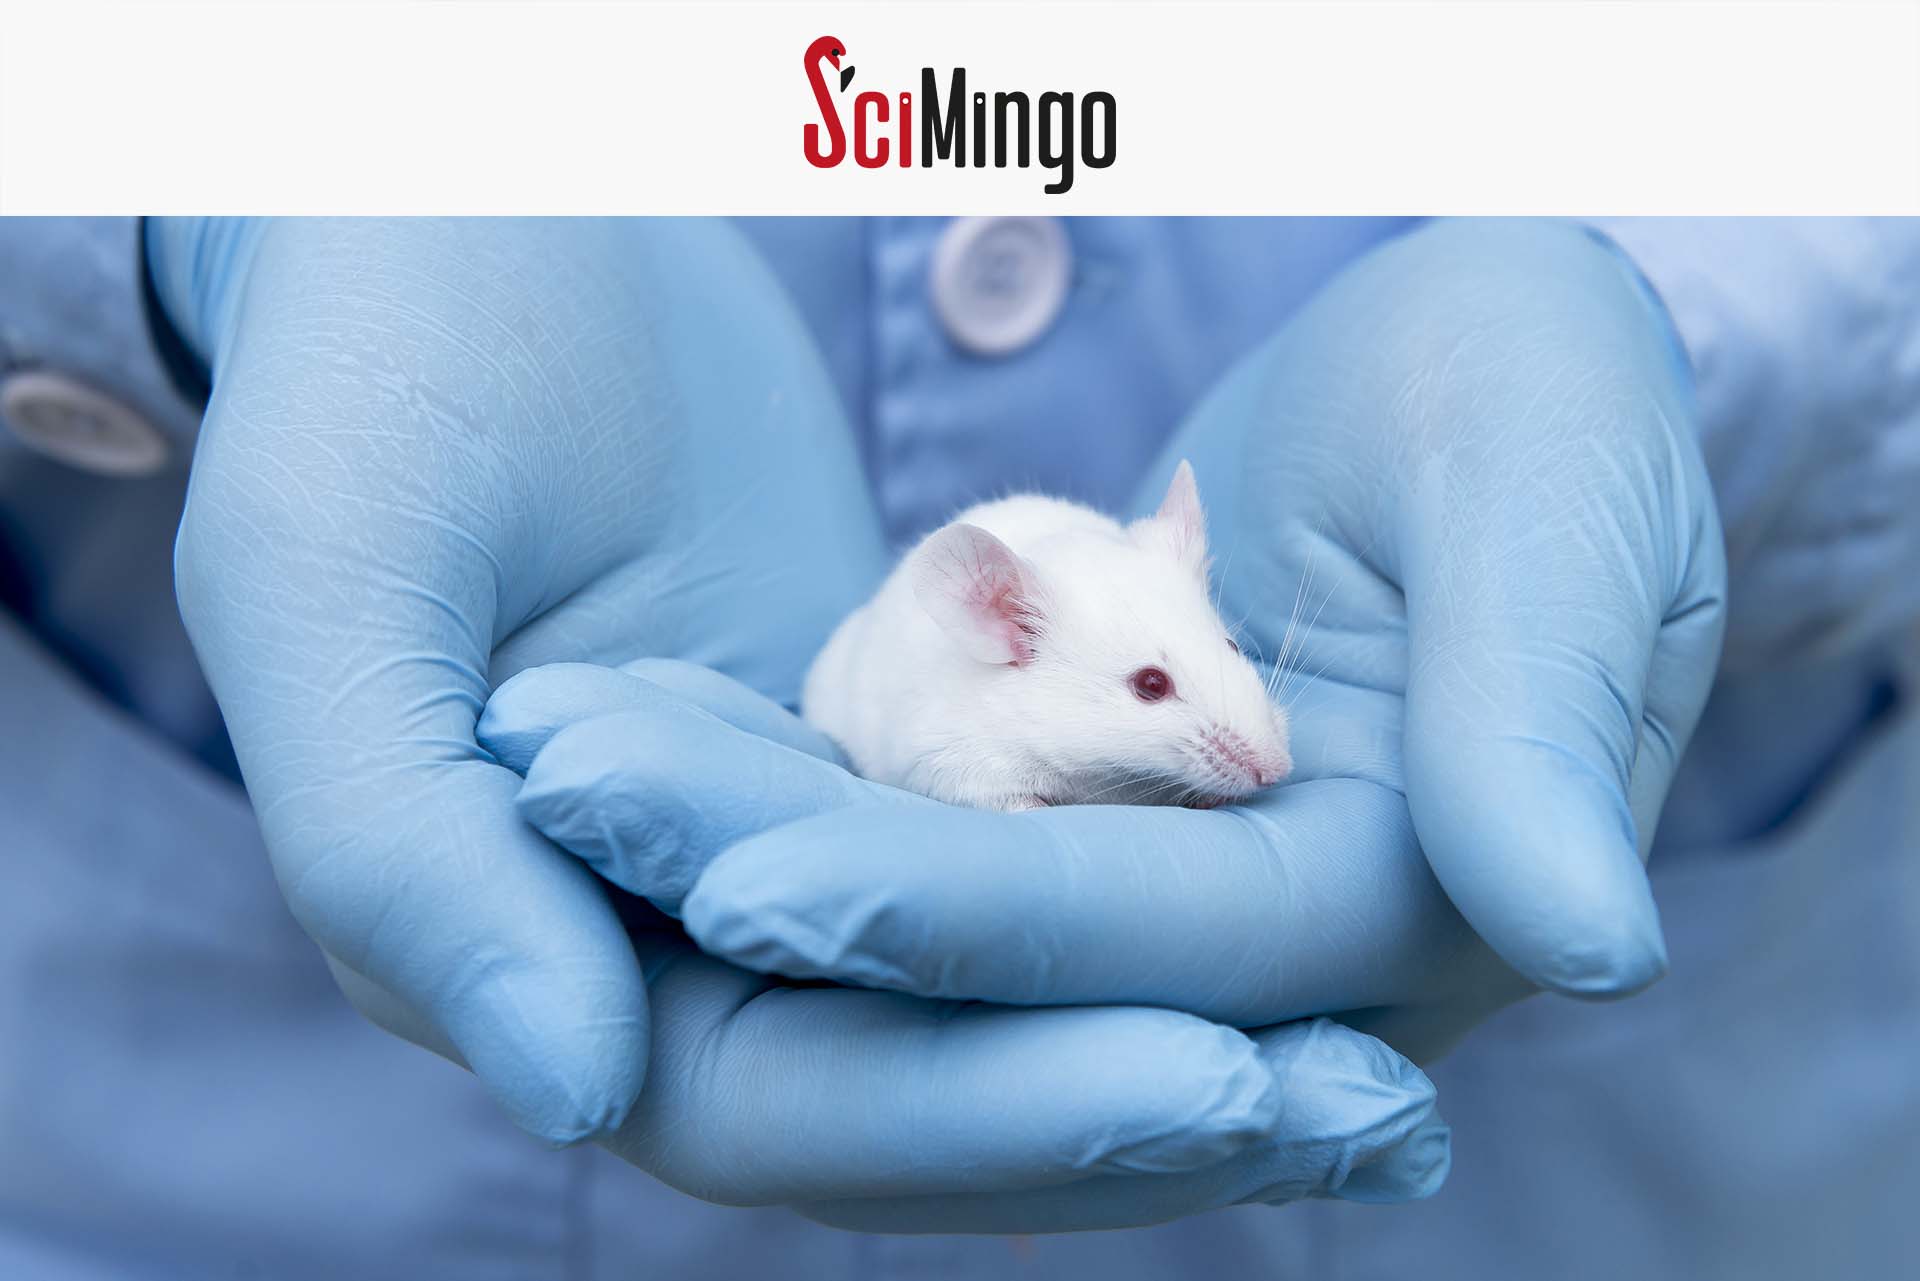 Lab mouse in gloved hands